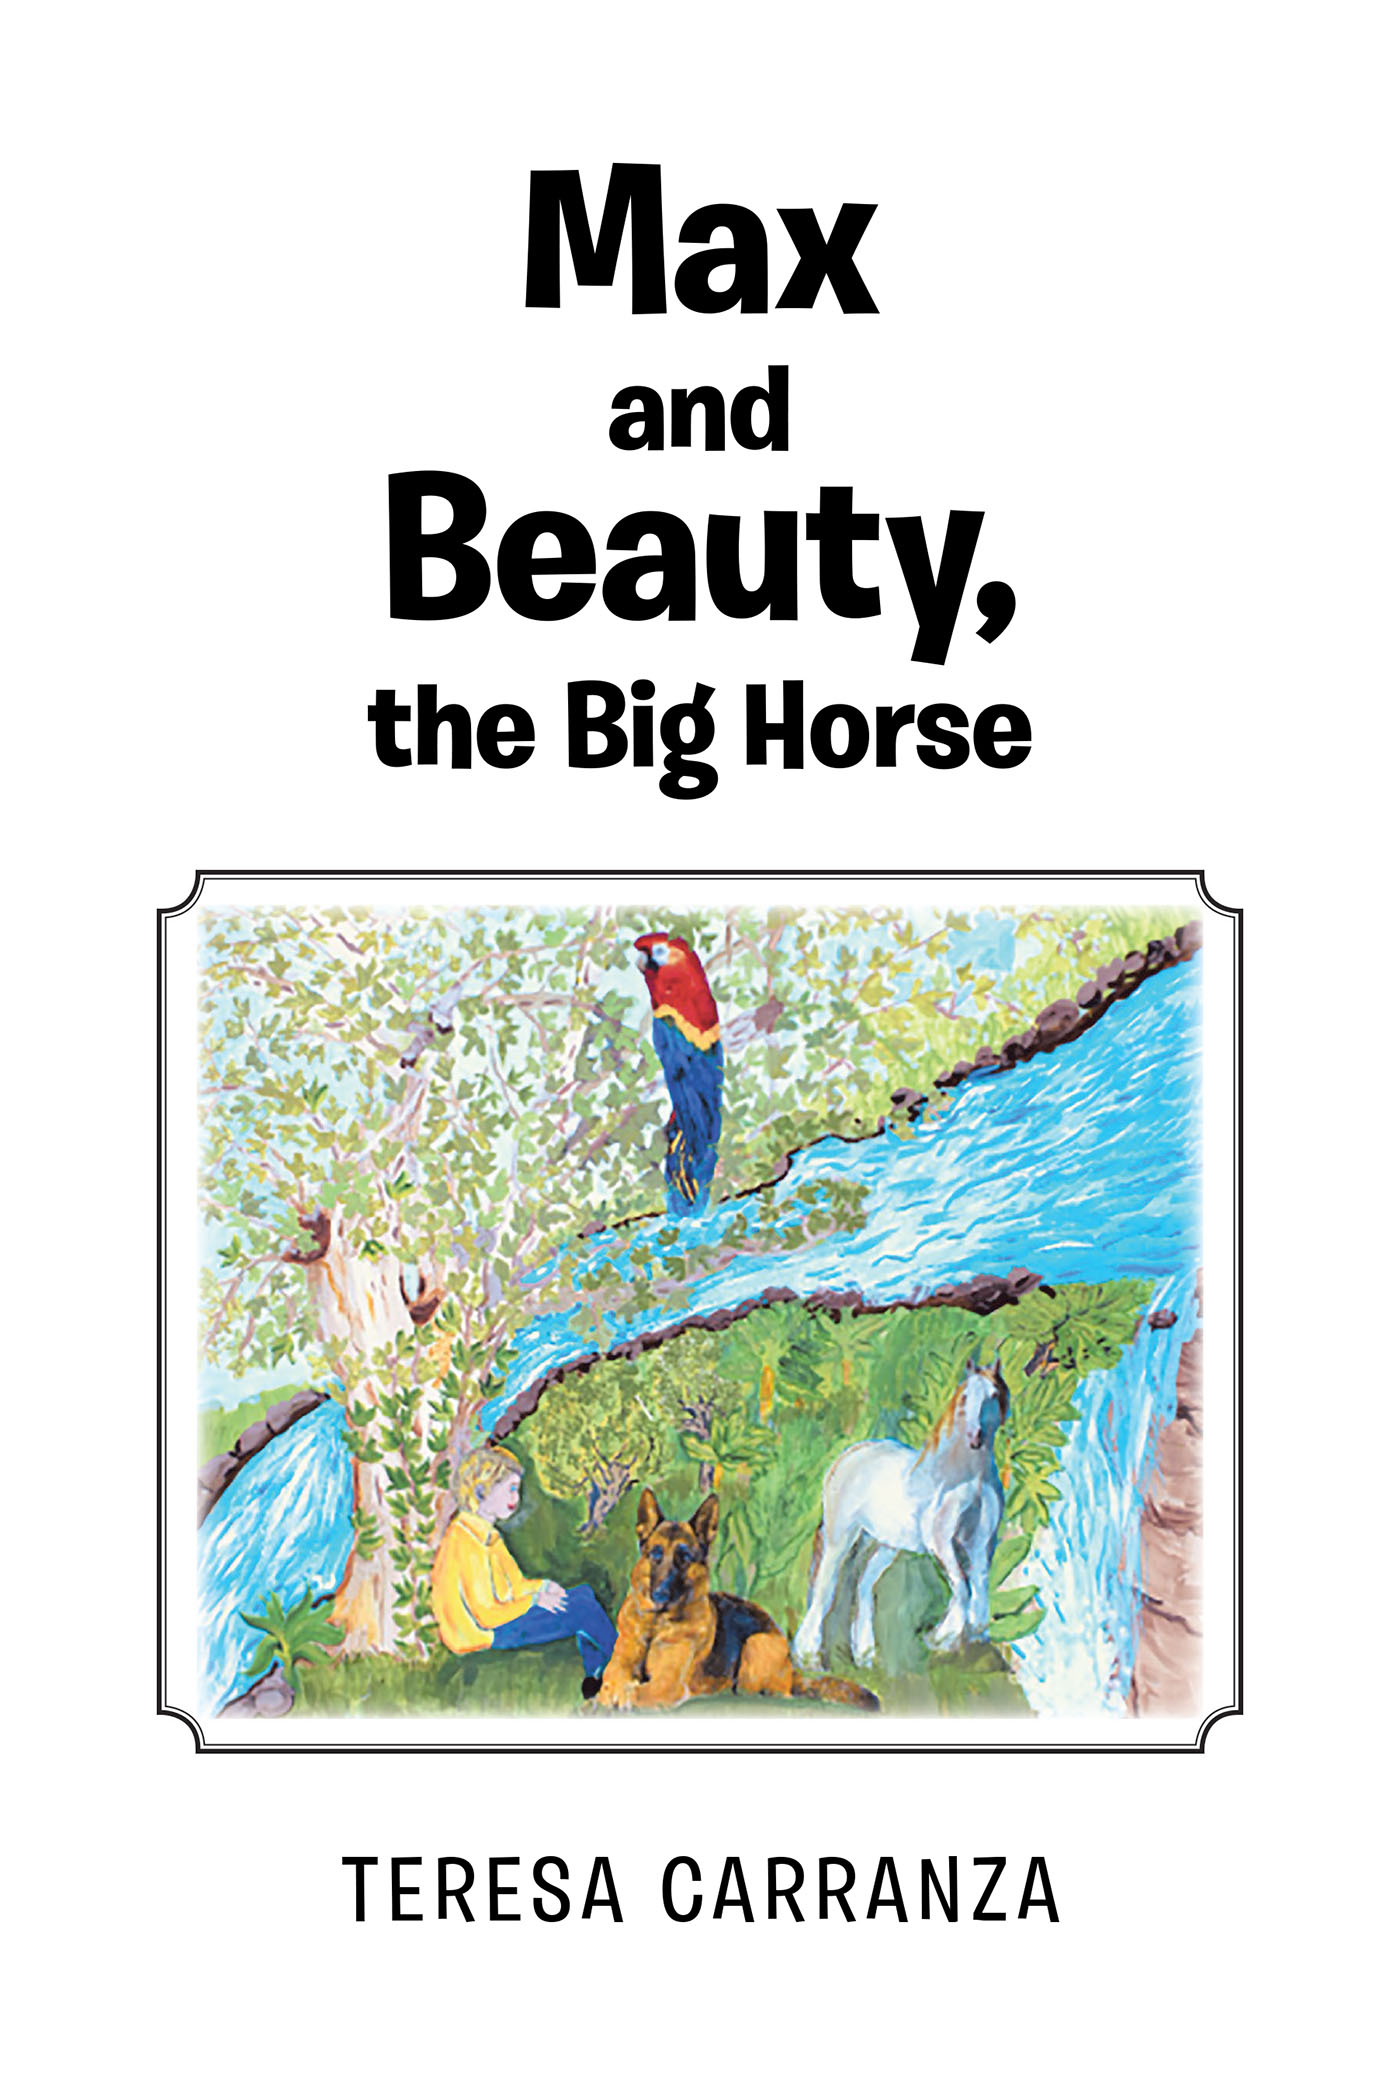 Author Teresa Carranza’s New Book, "Max and Beauty, the Big Horse," Follows the Riveting Adventures of a Young Boy & His Special Horse as They Travel the Globe Together